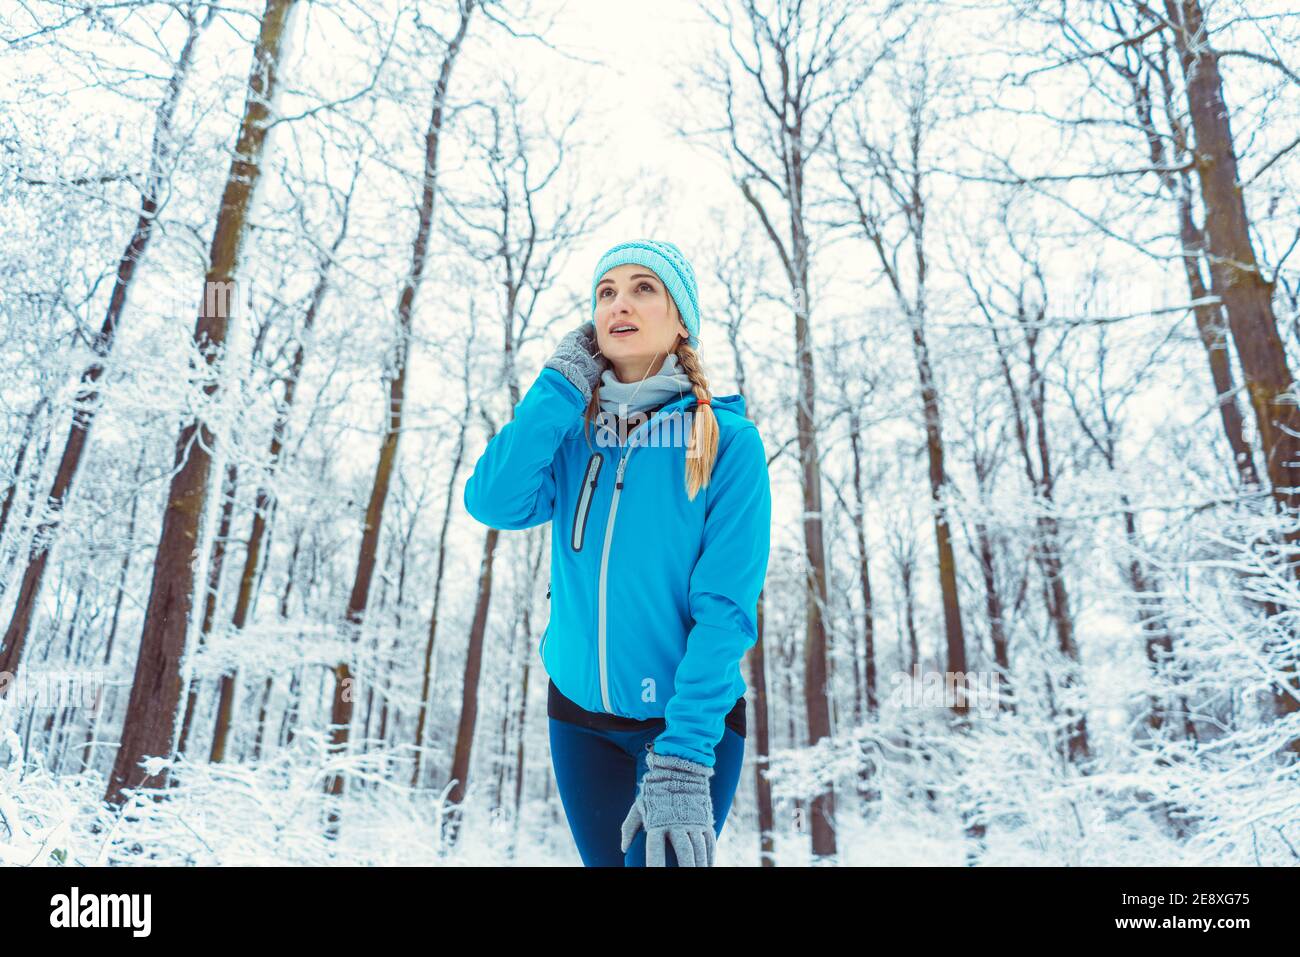 Woman wearing functional clothing in snow warming up for sports Stock Photo